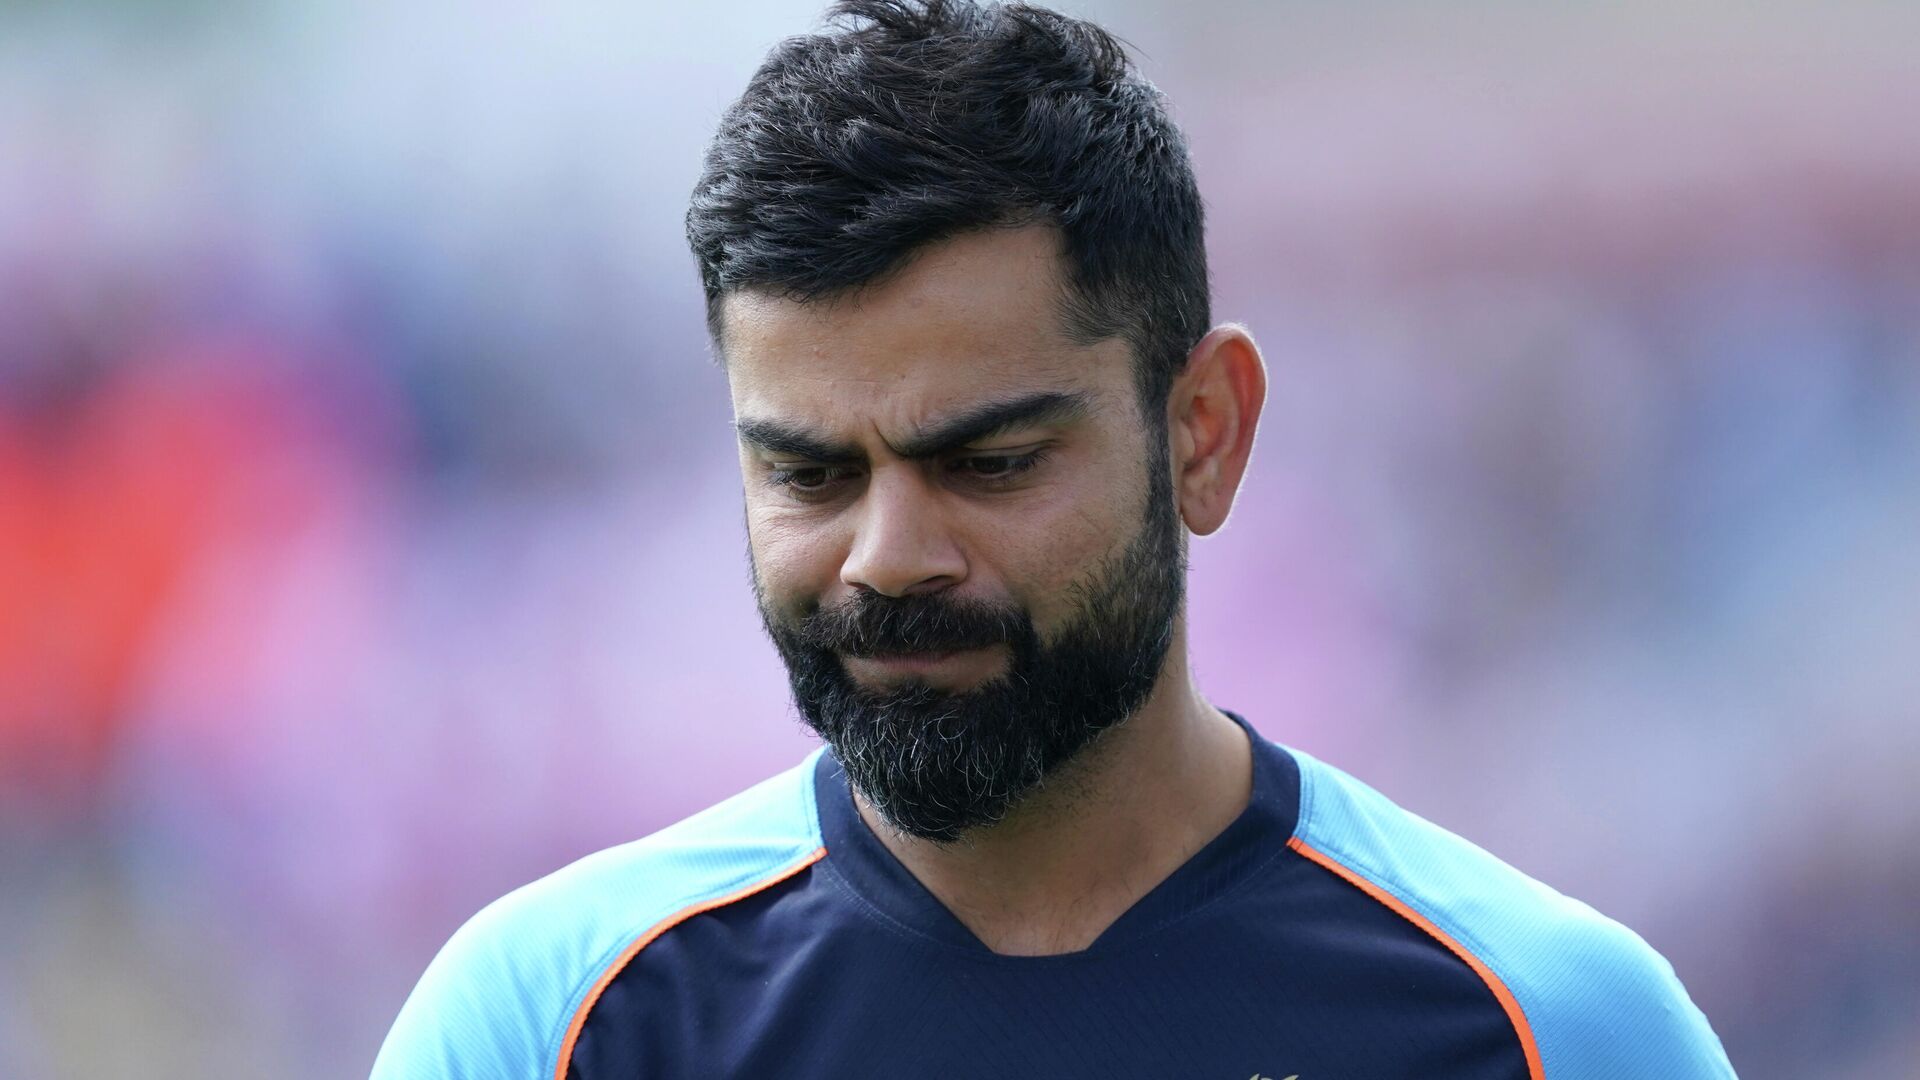 India's captain Virat Kohli reacts during the presentation ceremony after their loss on the fourth day of third test cricket match between England and India, at Headingley cricket ground in Leeds, England, Saturday, Aug. 28, 2021 - Sputnik International, 1920, 11.02.2022